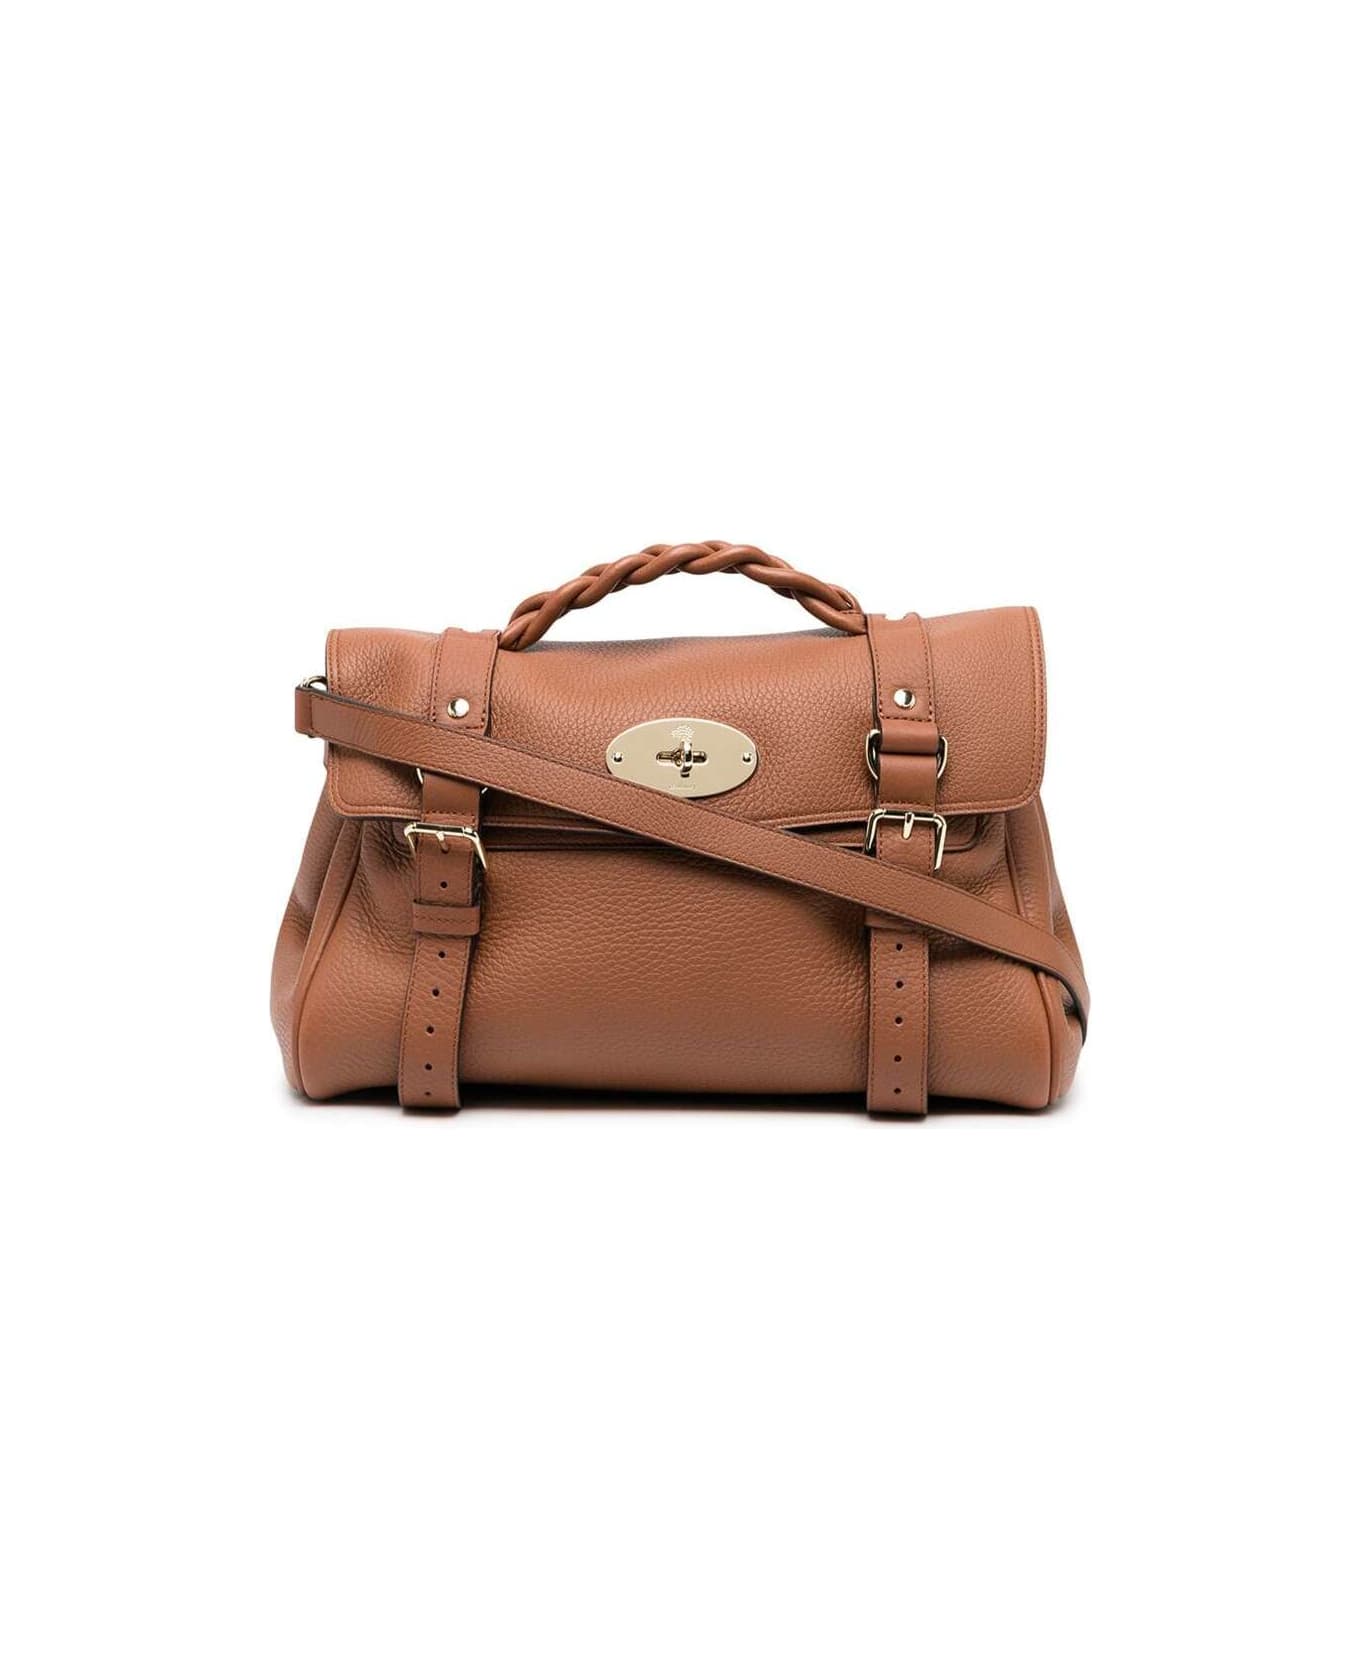 Mulberry 'alexa Heavy' Brown Handbag With Twist Lock Closure In Grainy Leather Woman Mulberry - Brown